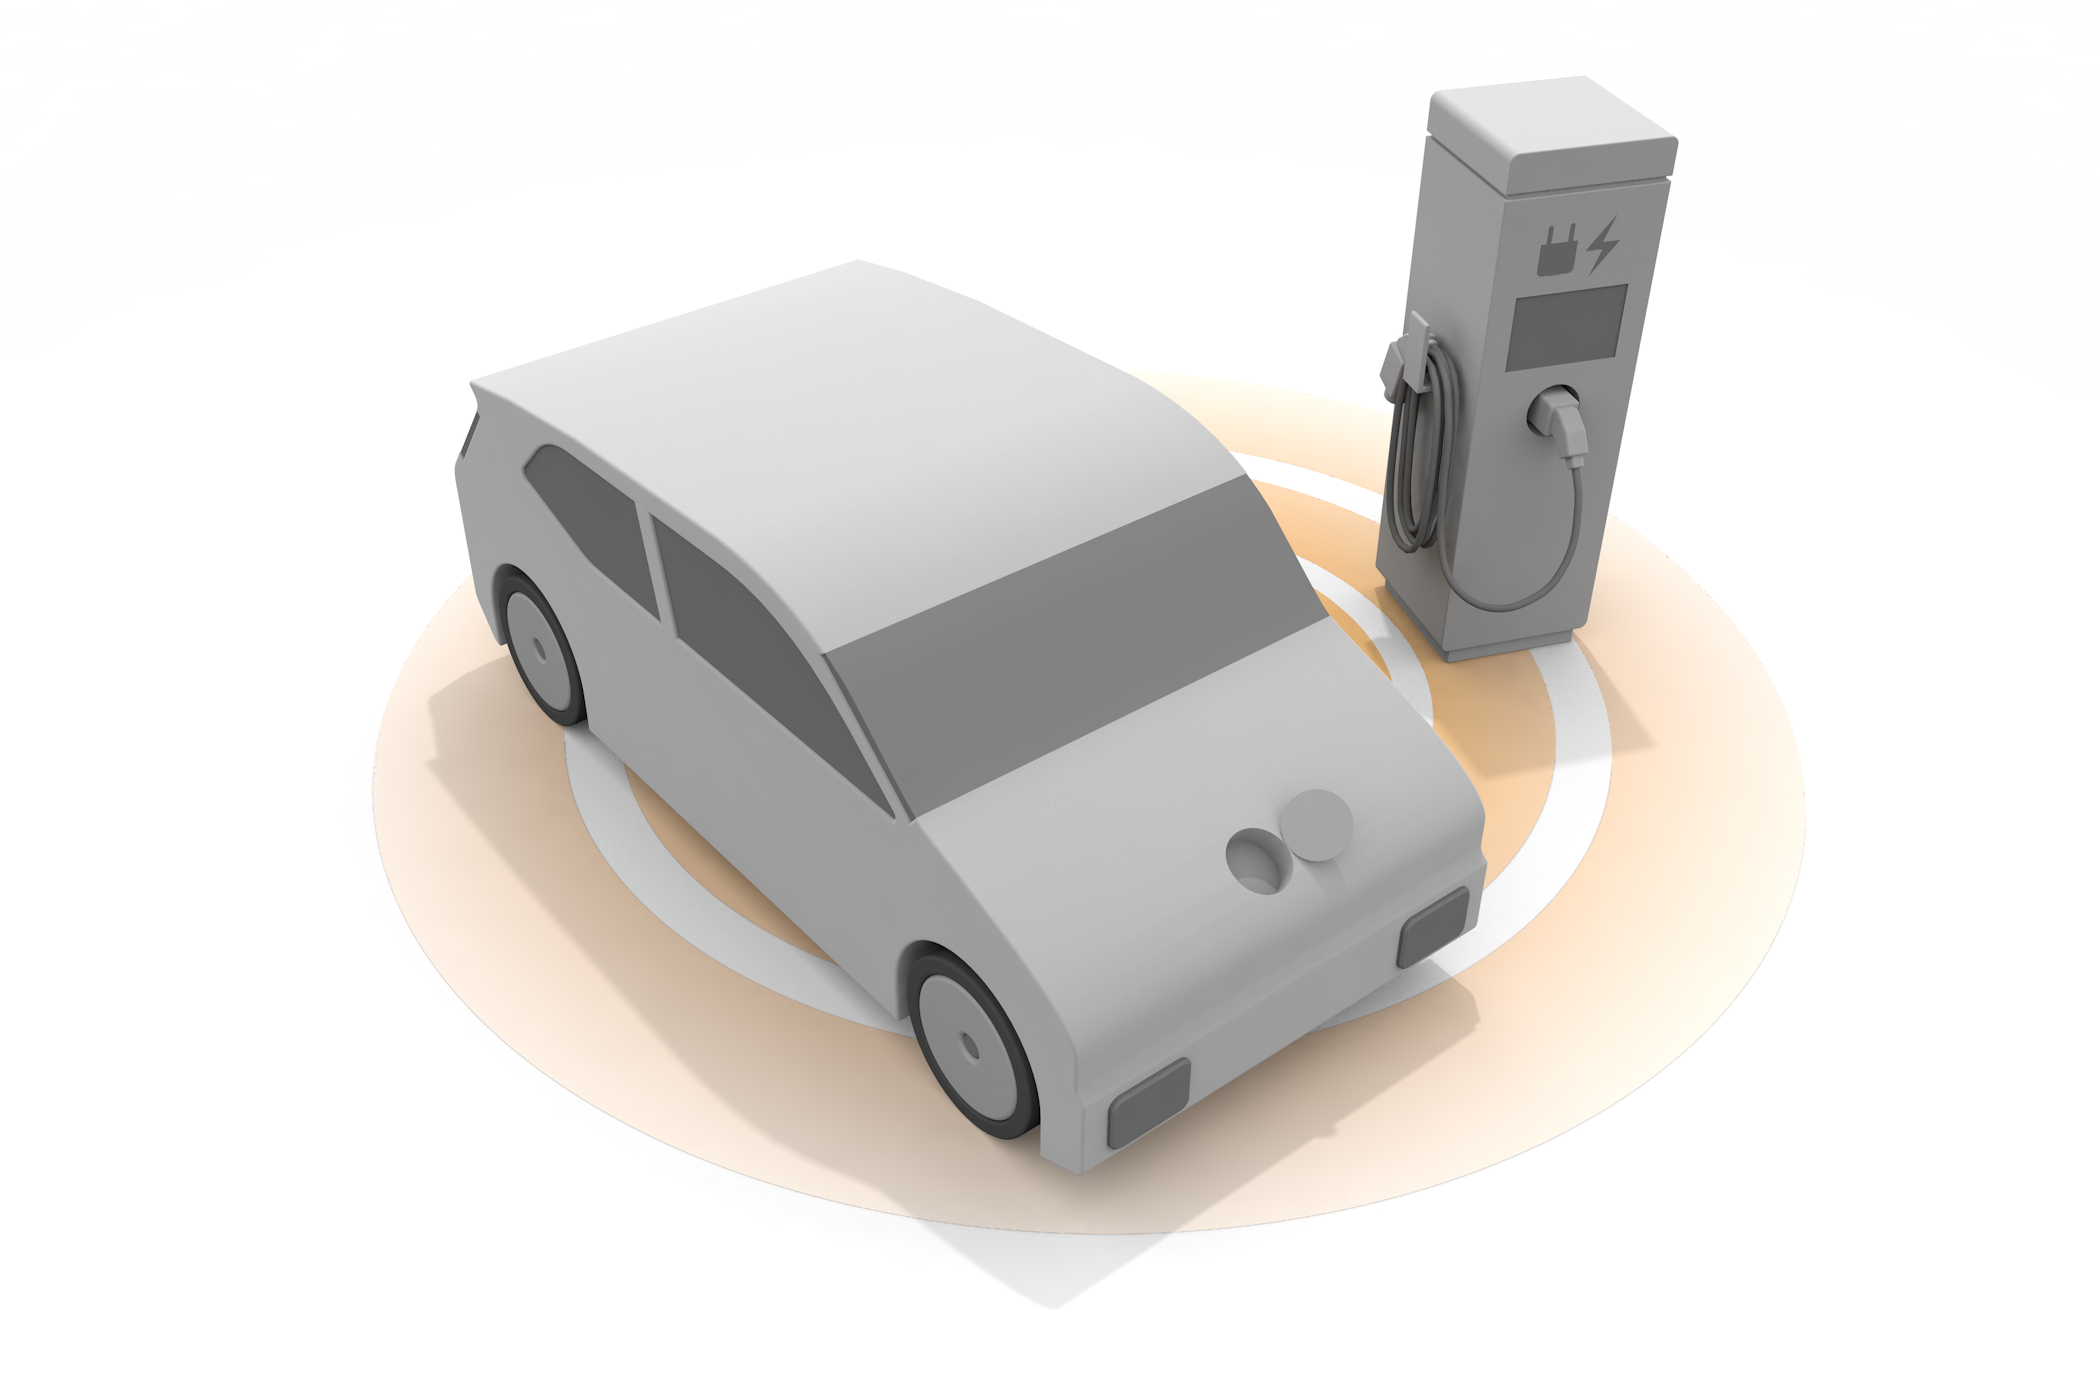 Car / Electric car / Dry battery / Classic car / EV / ECV --Illustration / 3D rendering / Free material / Commercial use OK